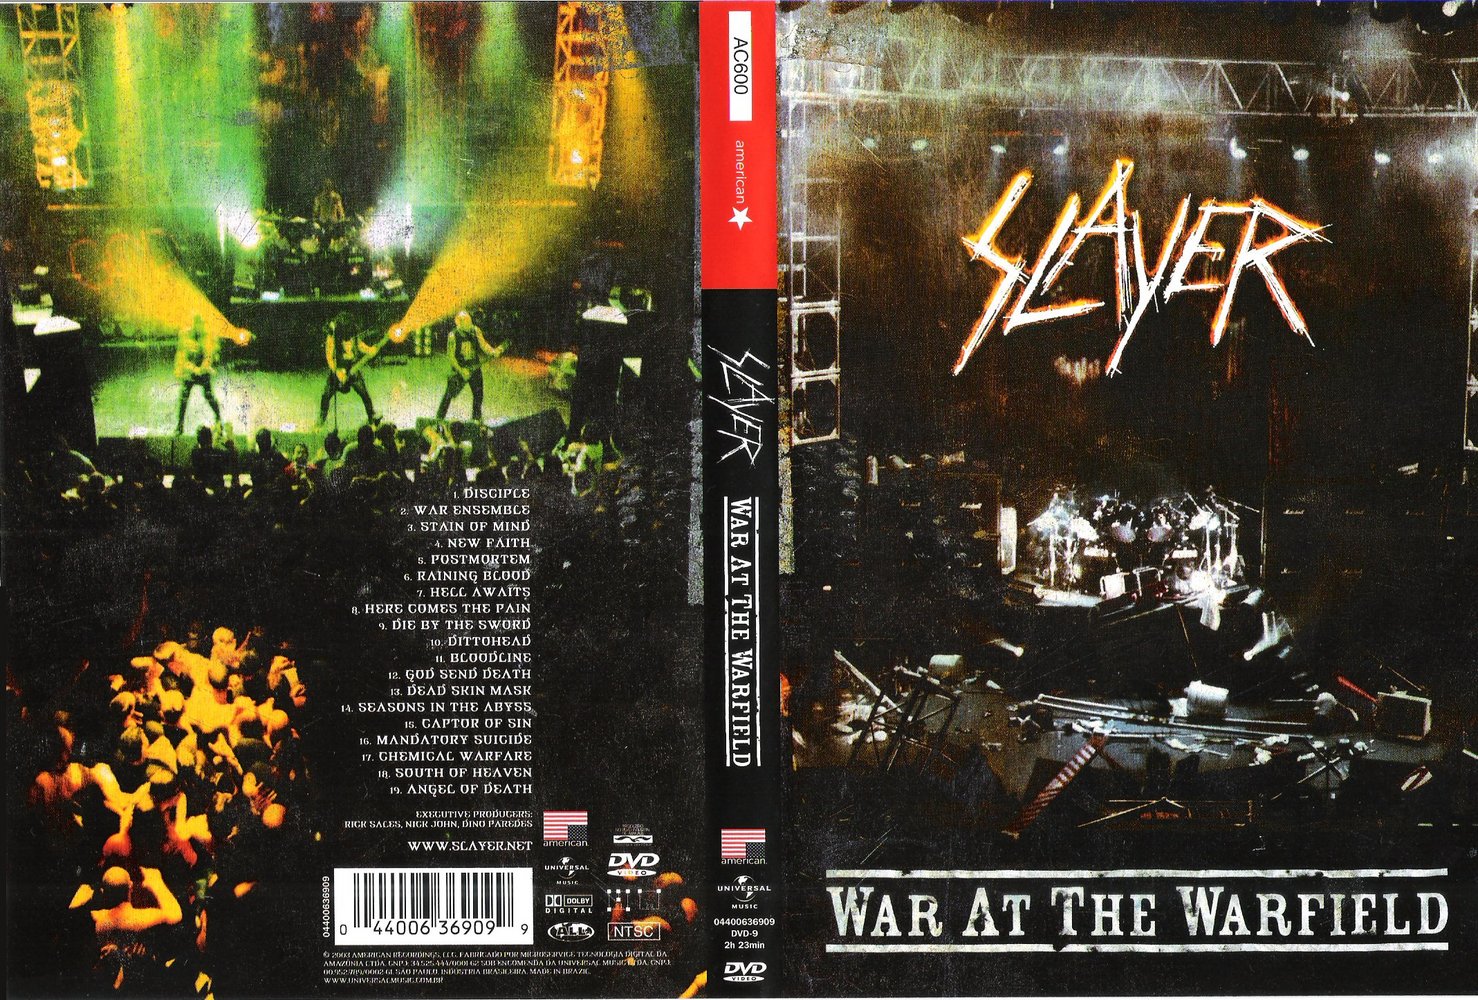 Jaquette DVD Slayer War at the Warfield v2